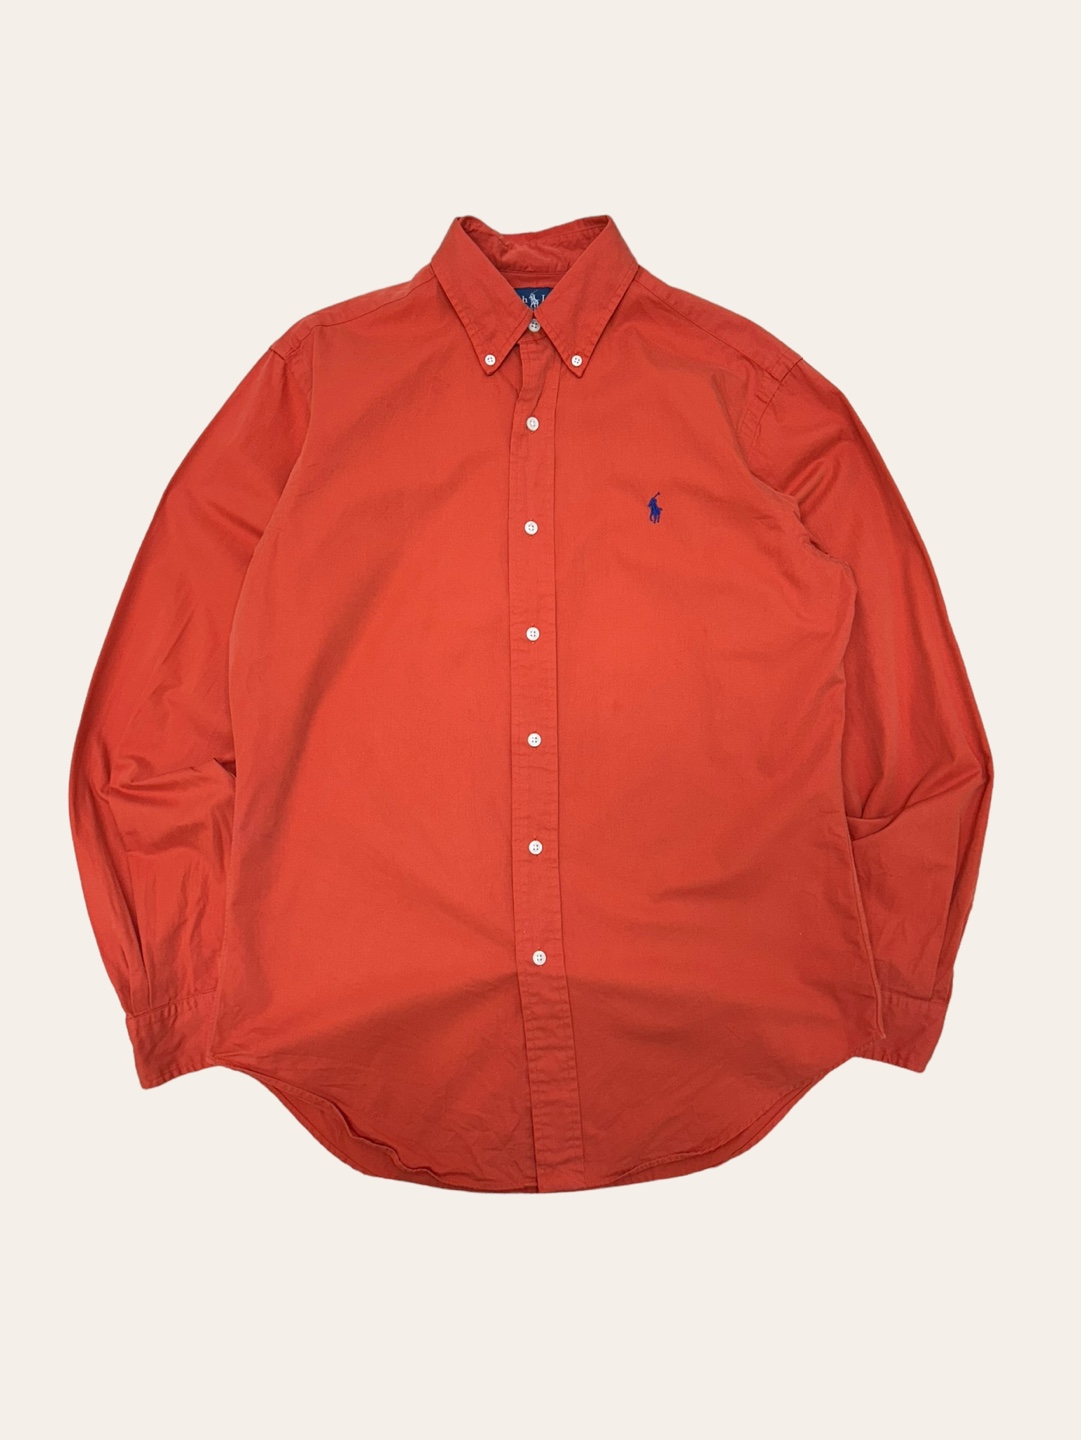 (From USA)Polo ralph lauren orange solid shirt S